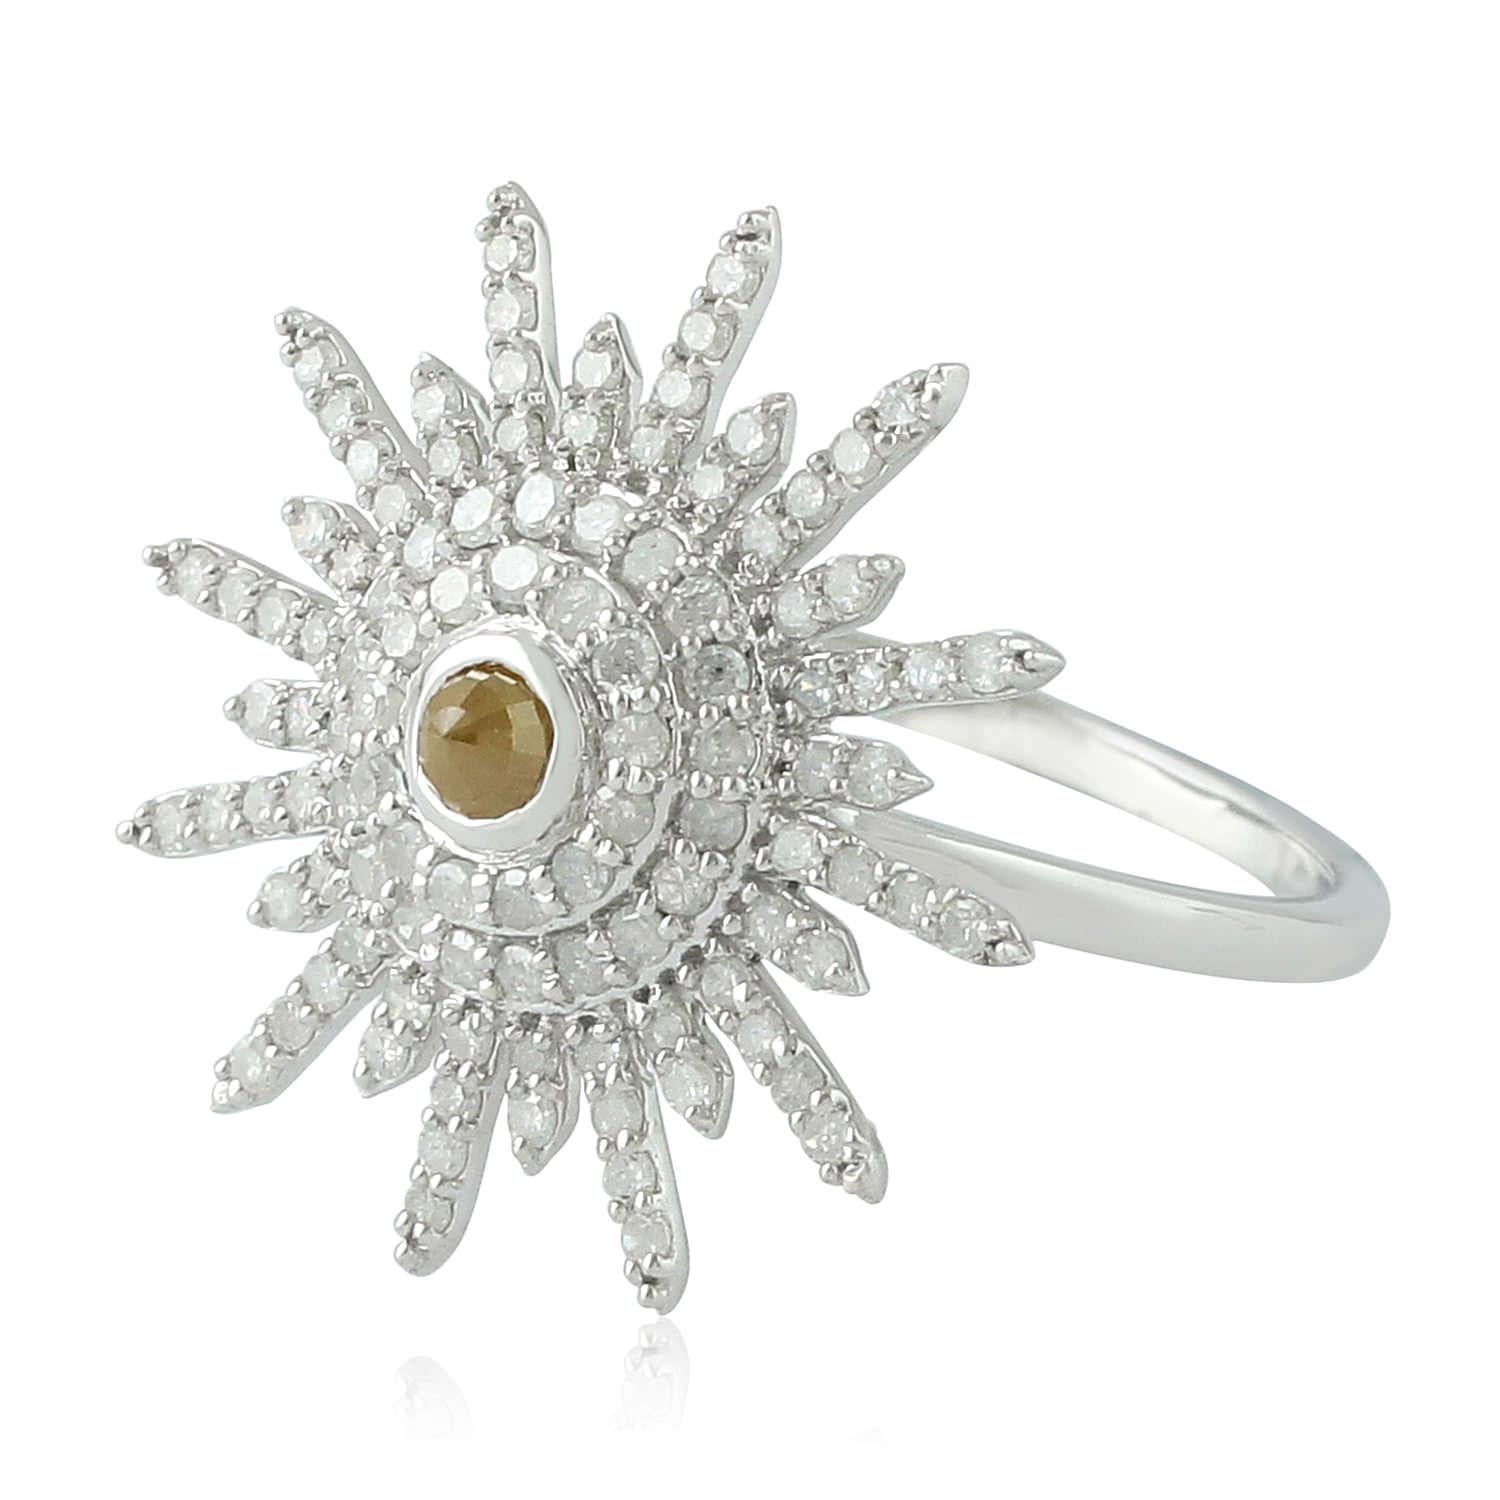 14 Karat White Gold 0.90 Carat Diamond Pave Cocktail Ring Flower Design Jewelry

0.93 carats of White Round brilliant-cut diamonds Pave set on 14k White Gold Flower Design.
Approximately   mm wide
Set in 14k white gold.
The finger size is currently